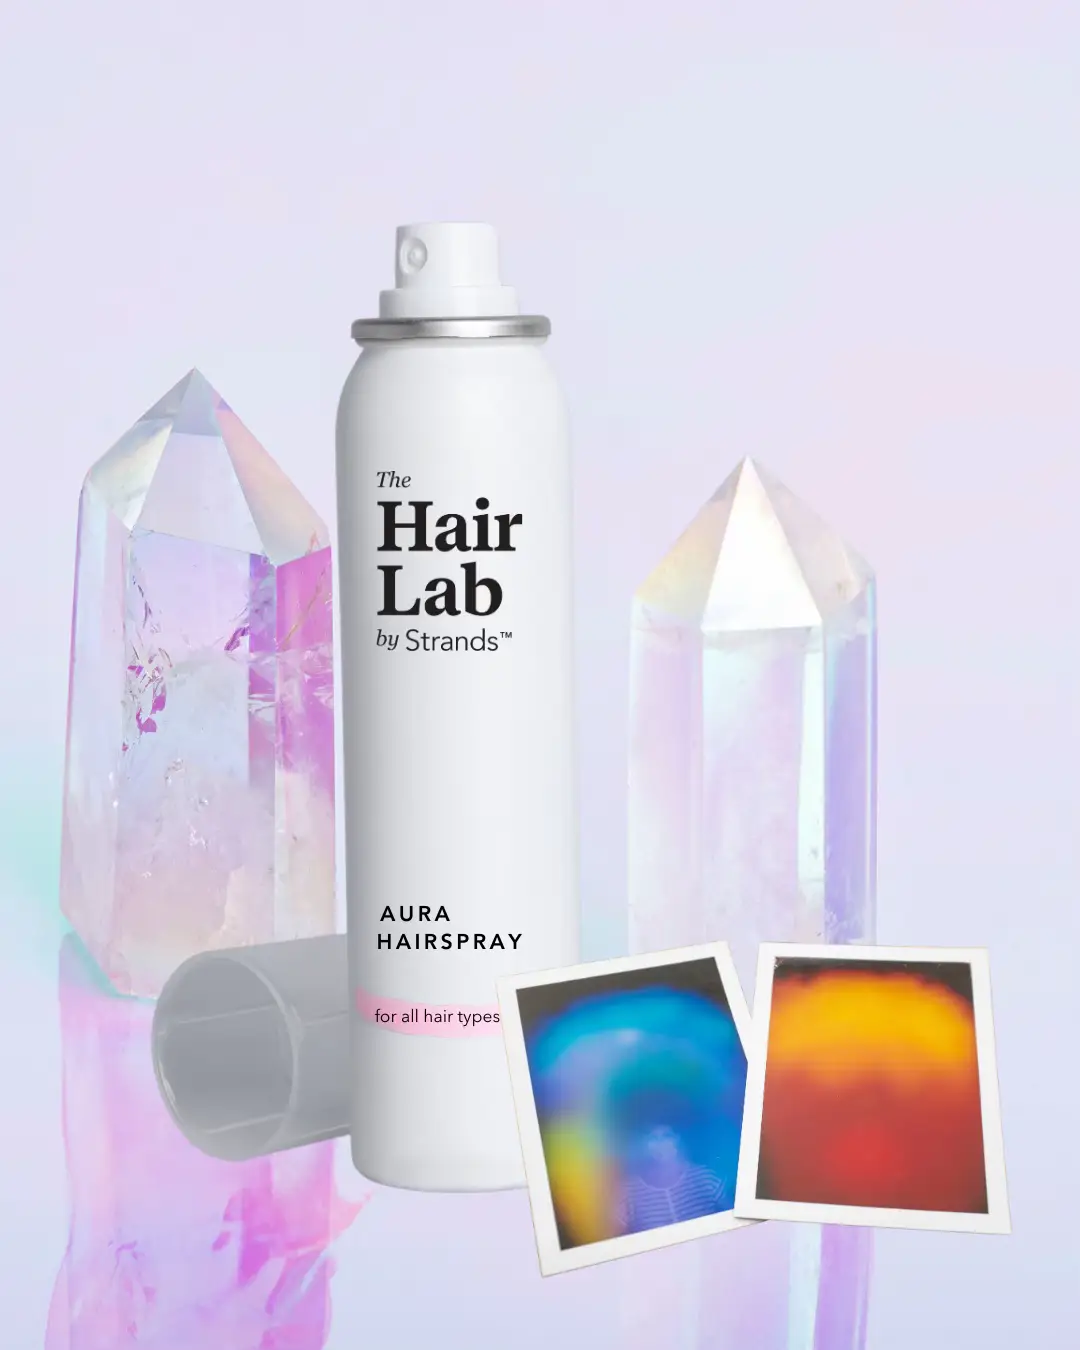 Fortune-telling for your hair! 🔮 Introducing our all-new Aura Hairspray that can change your energy and predict your hair’s future. 💫⁠💁‍♀️ Why you’ll love it: 🔮 For all hair types 🔮 Can boost your hair’s energy 🔮 Provide instant positive vibes ⁠ April Fools! 😆 But with our customizable hair care system, your hair’s destiny is in your hands! ✨️ #thehairlab #haircare #hairtok #hairinspo #haircare #hairgoals #AprilFools #aprilfoolsjoke #aura 